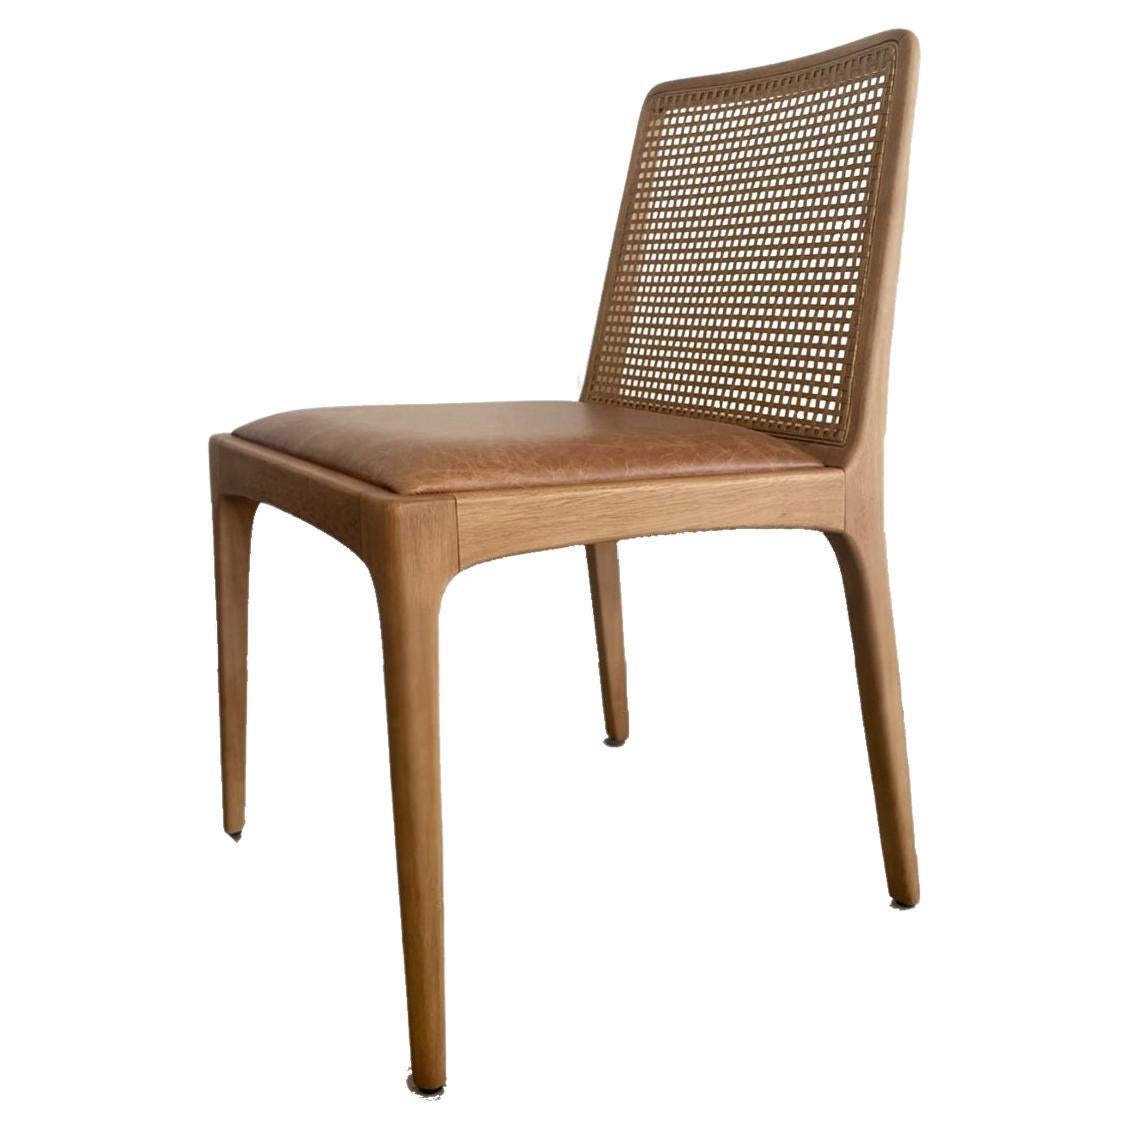 "Julia" Minimalist Chair in Solid Wood, cane backrest and natural leather seat For Sale